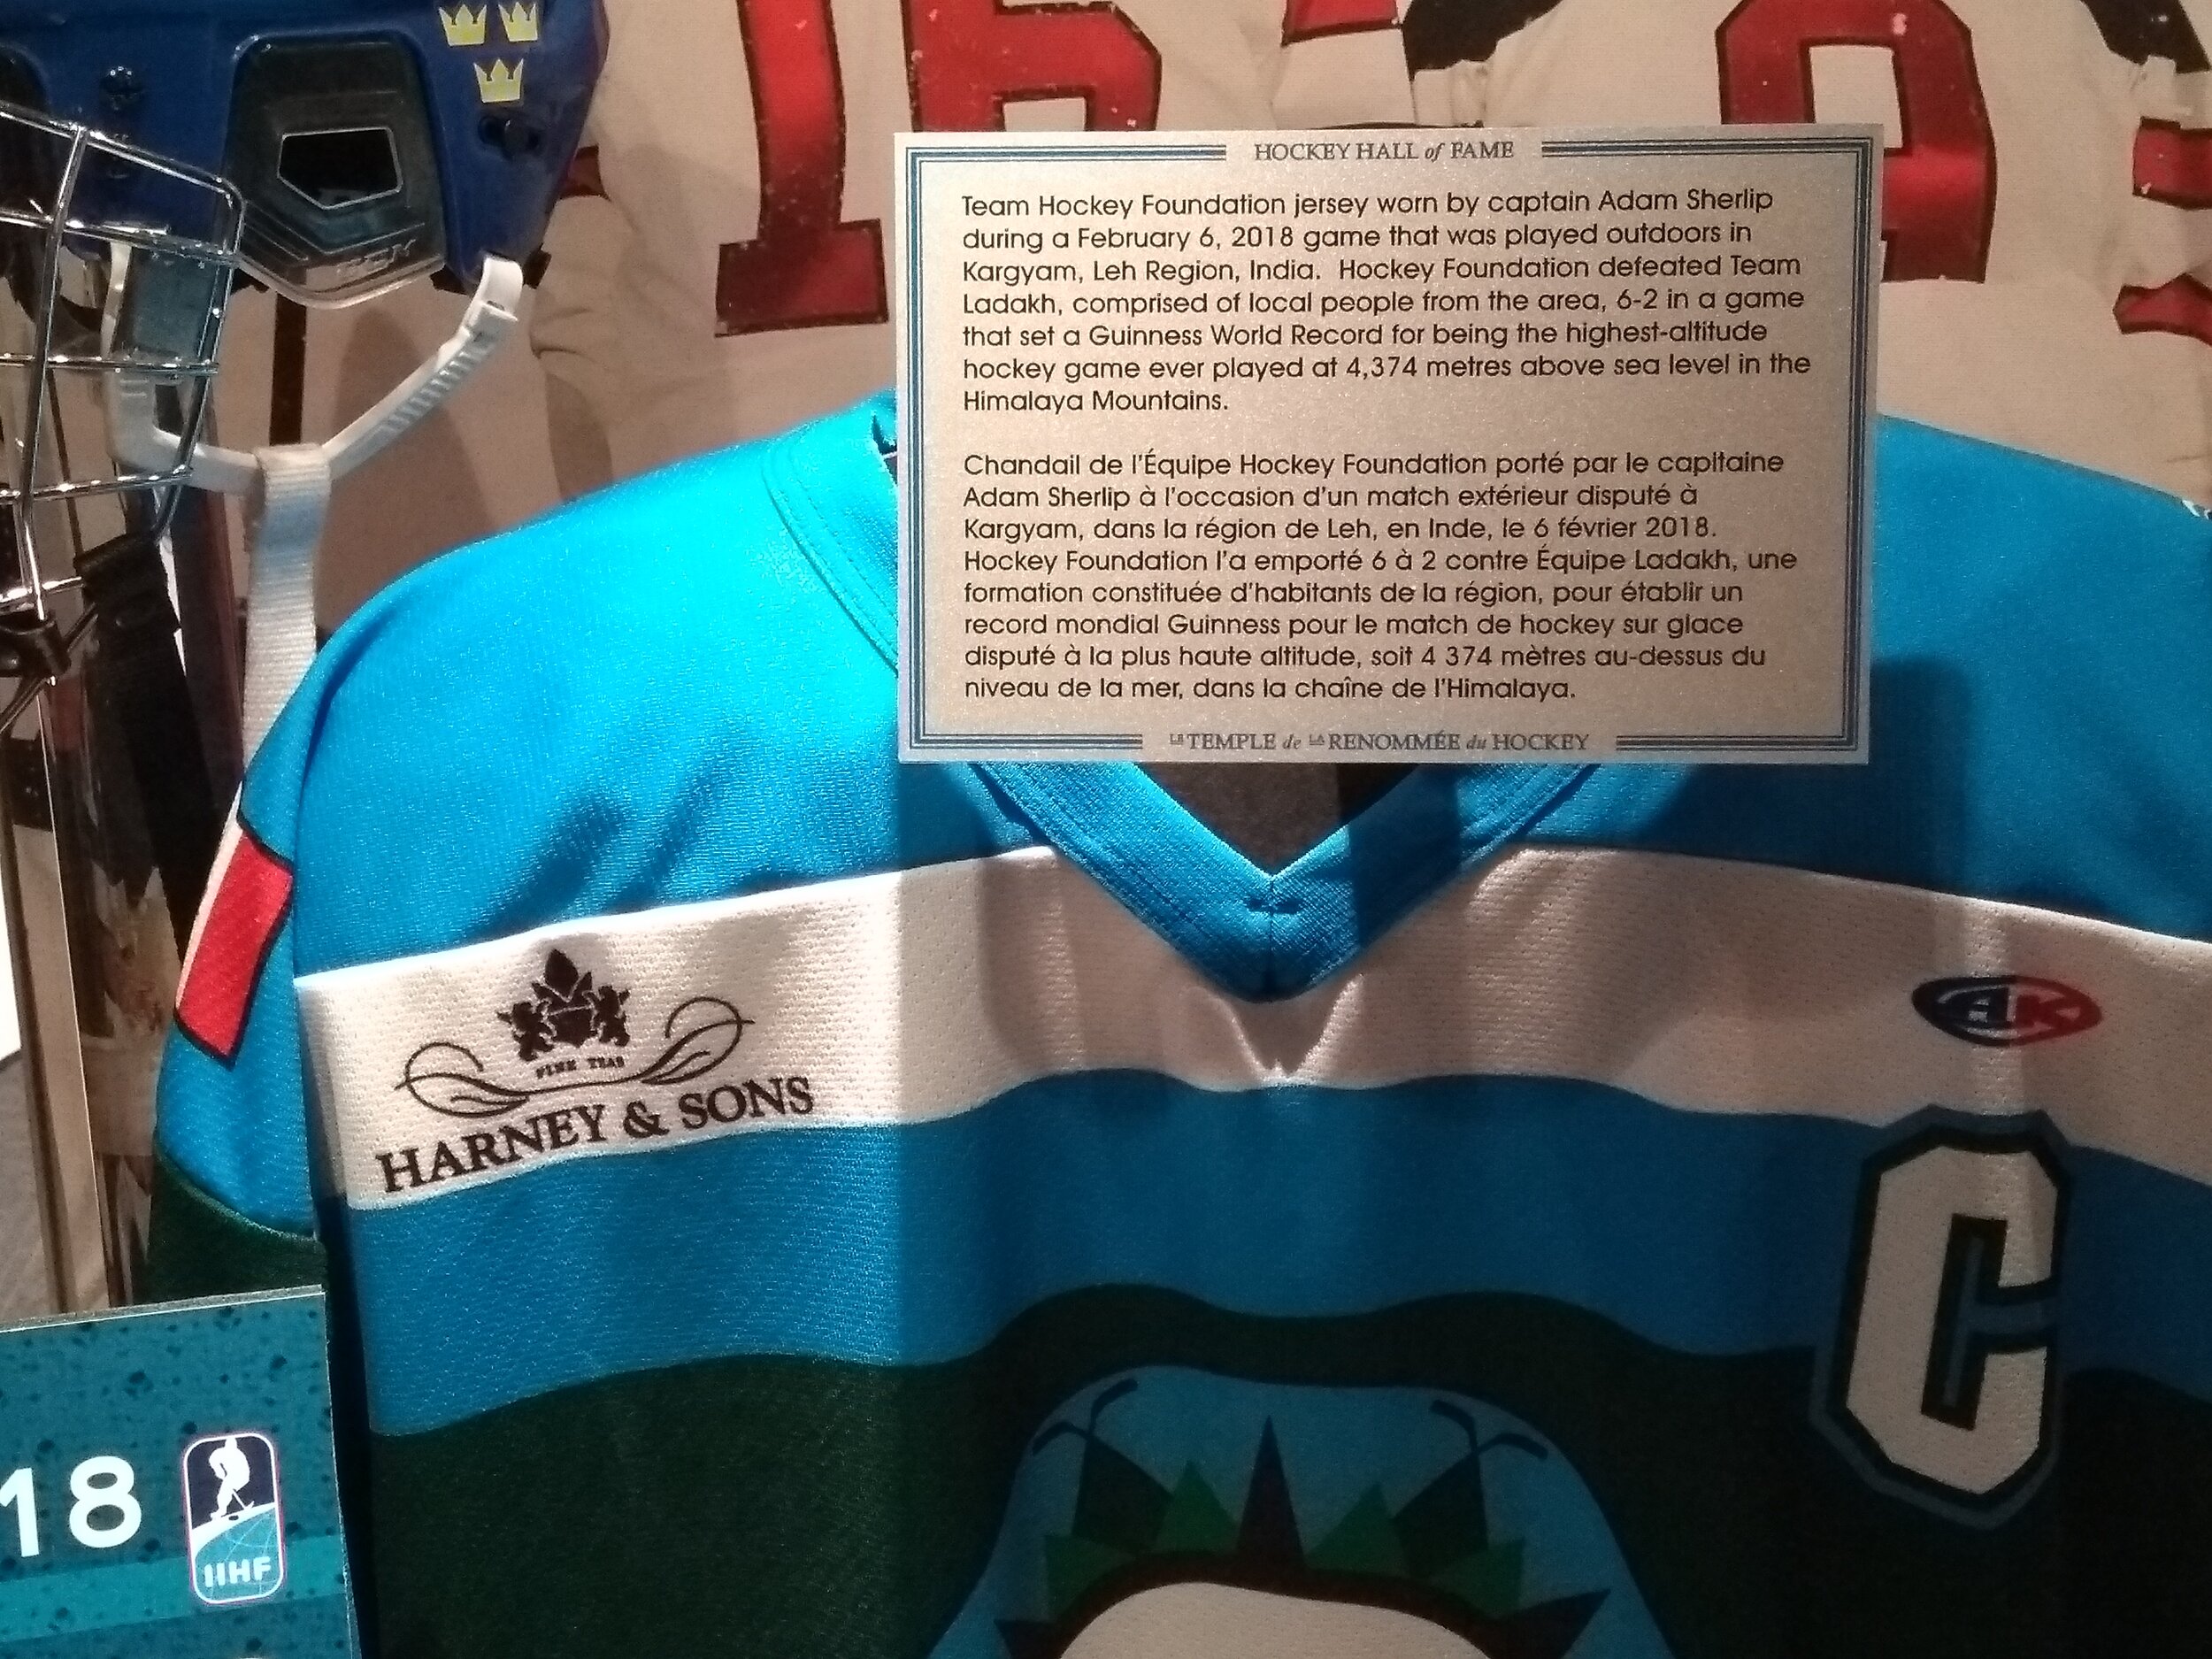 Sharks Hall of Famers jersey